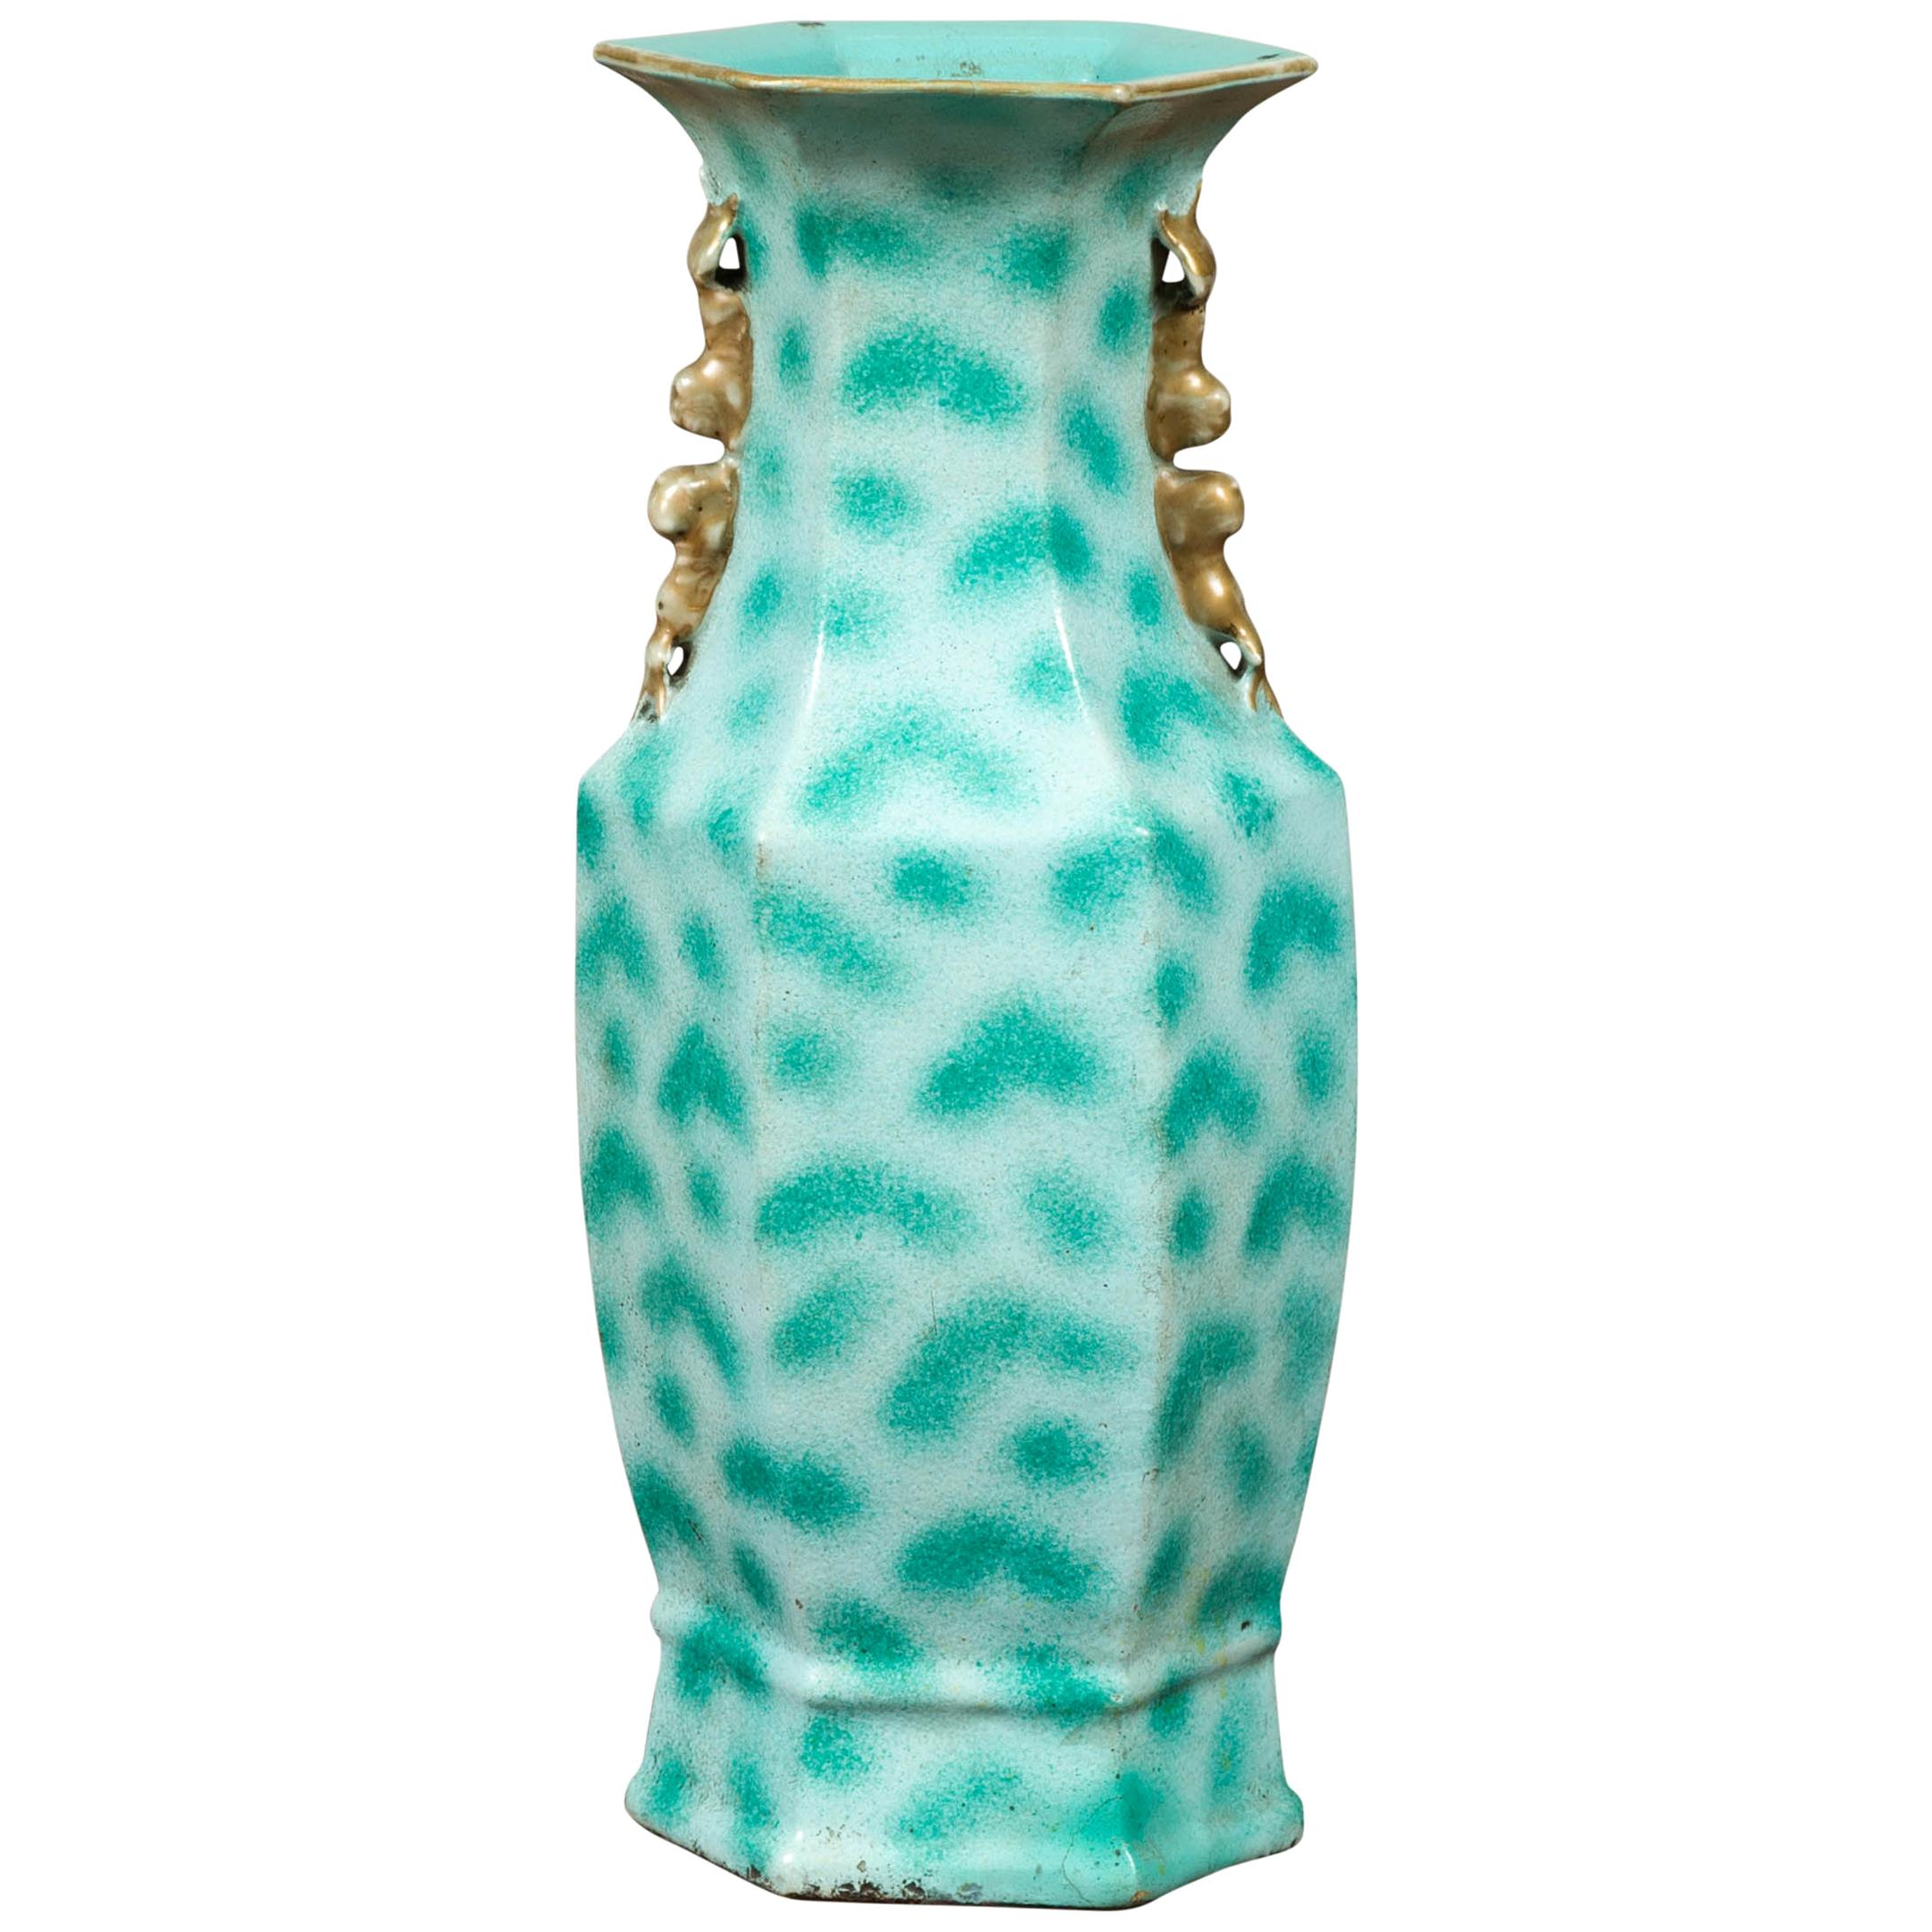 Vintage Chinese Turquoise Vase with Spotted Design and Hexagonal Neck